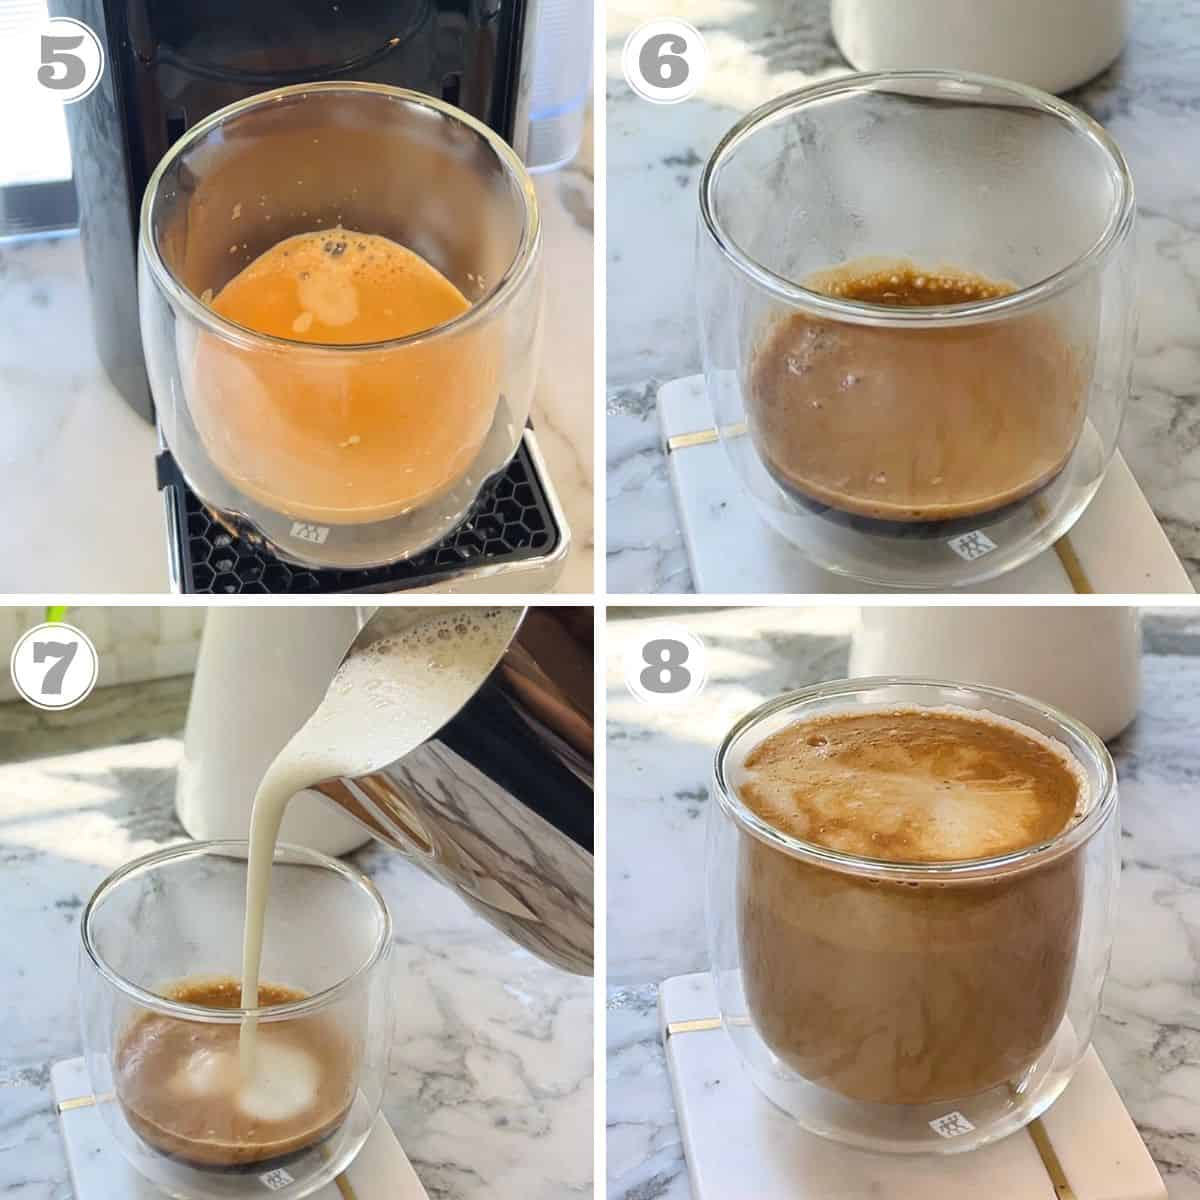 Photos five through eight showing steamed milk poured over espresso 